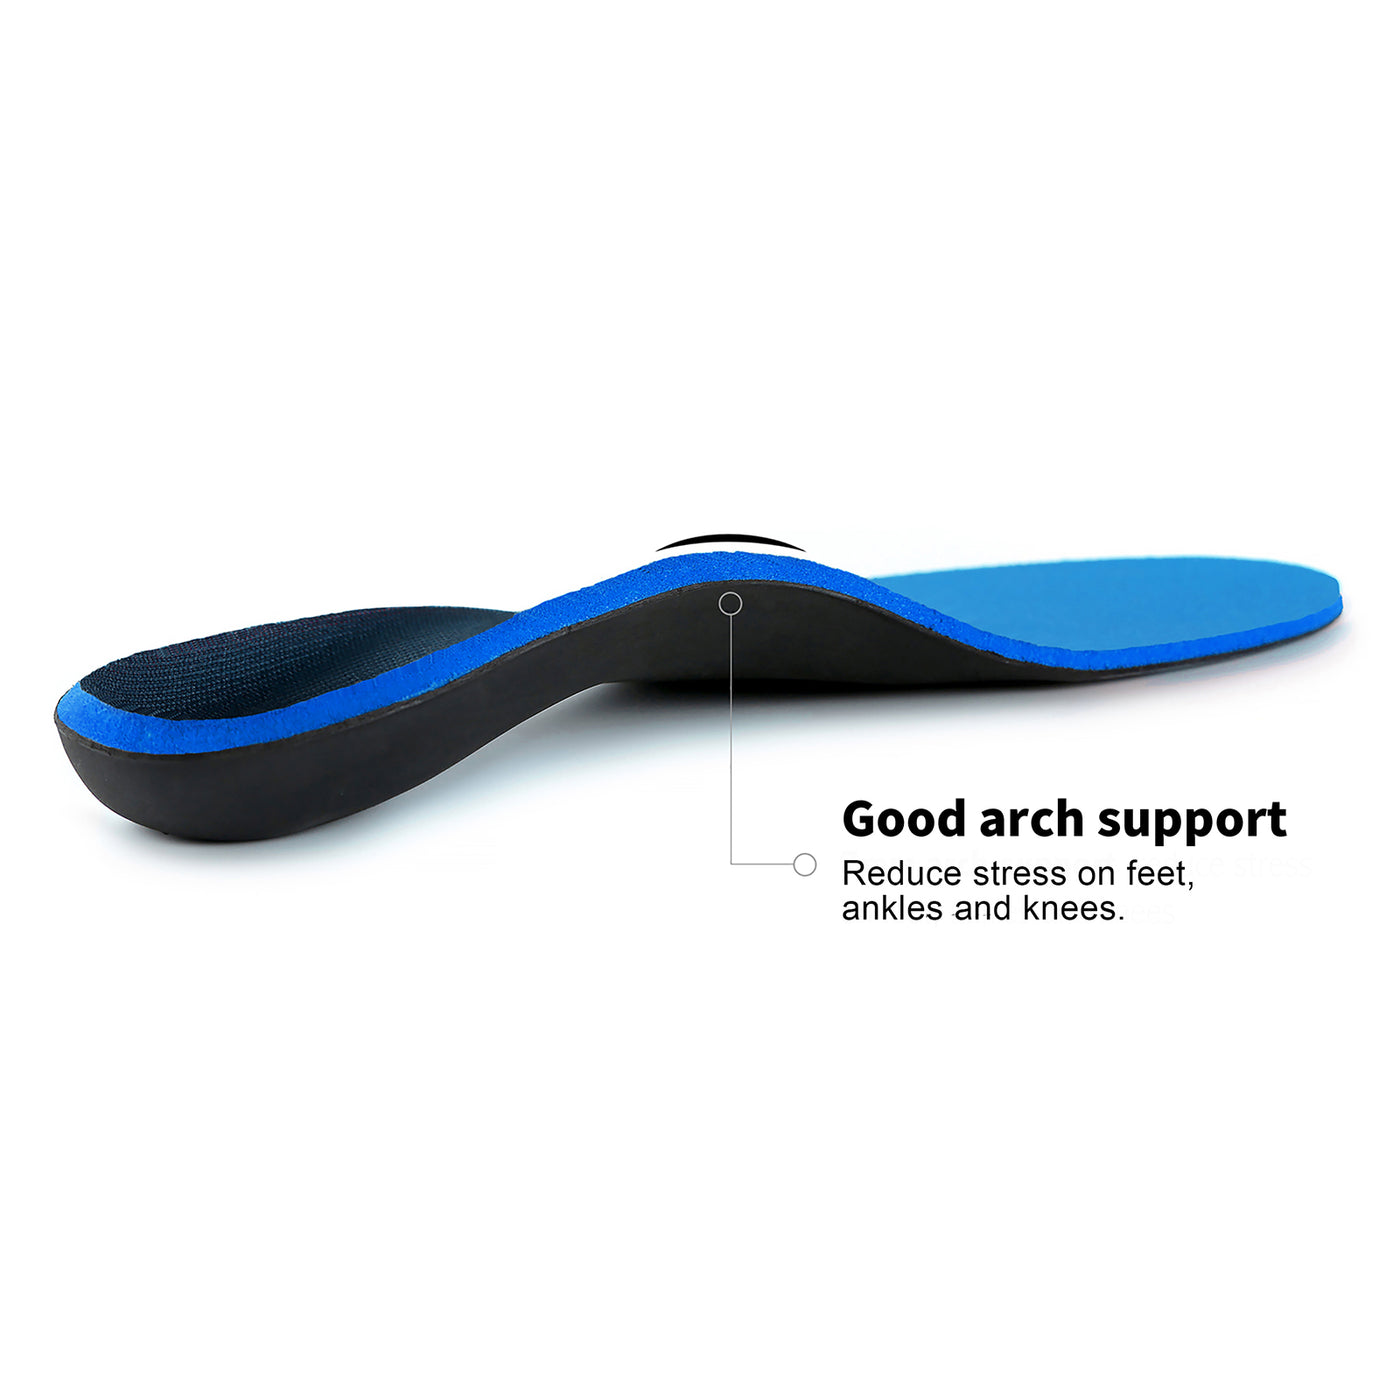 WALKHERO Men's Arch Support Orthotic Insoles Blue